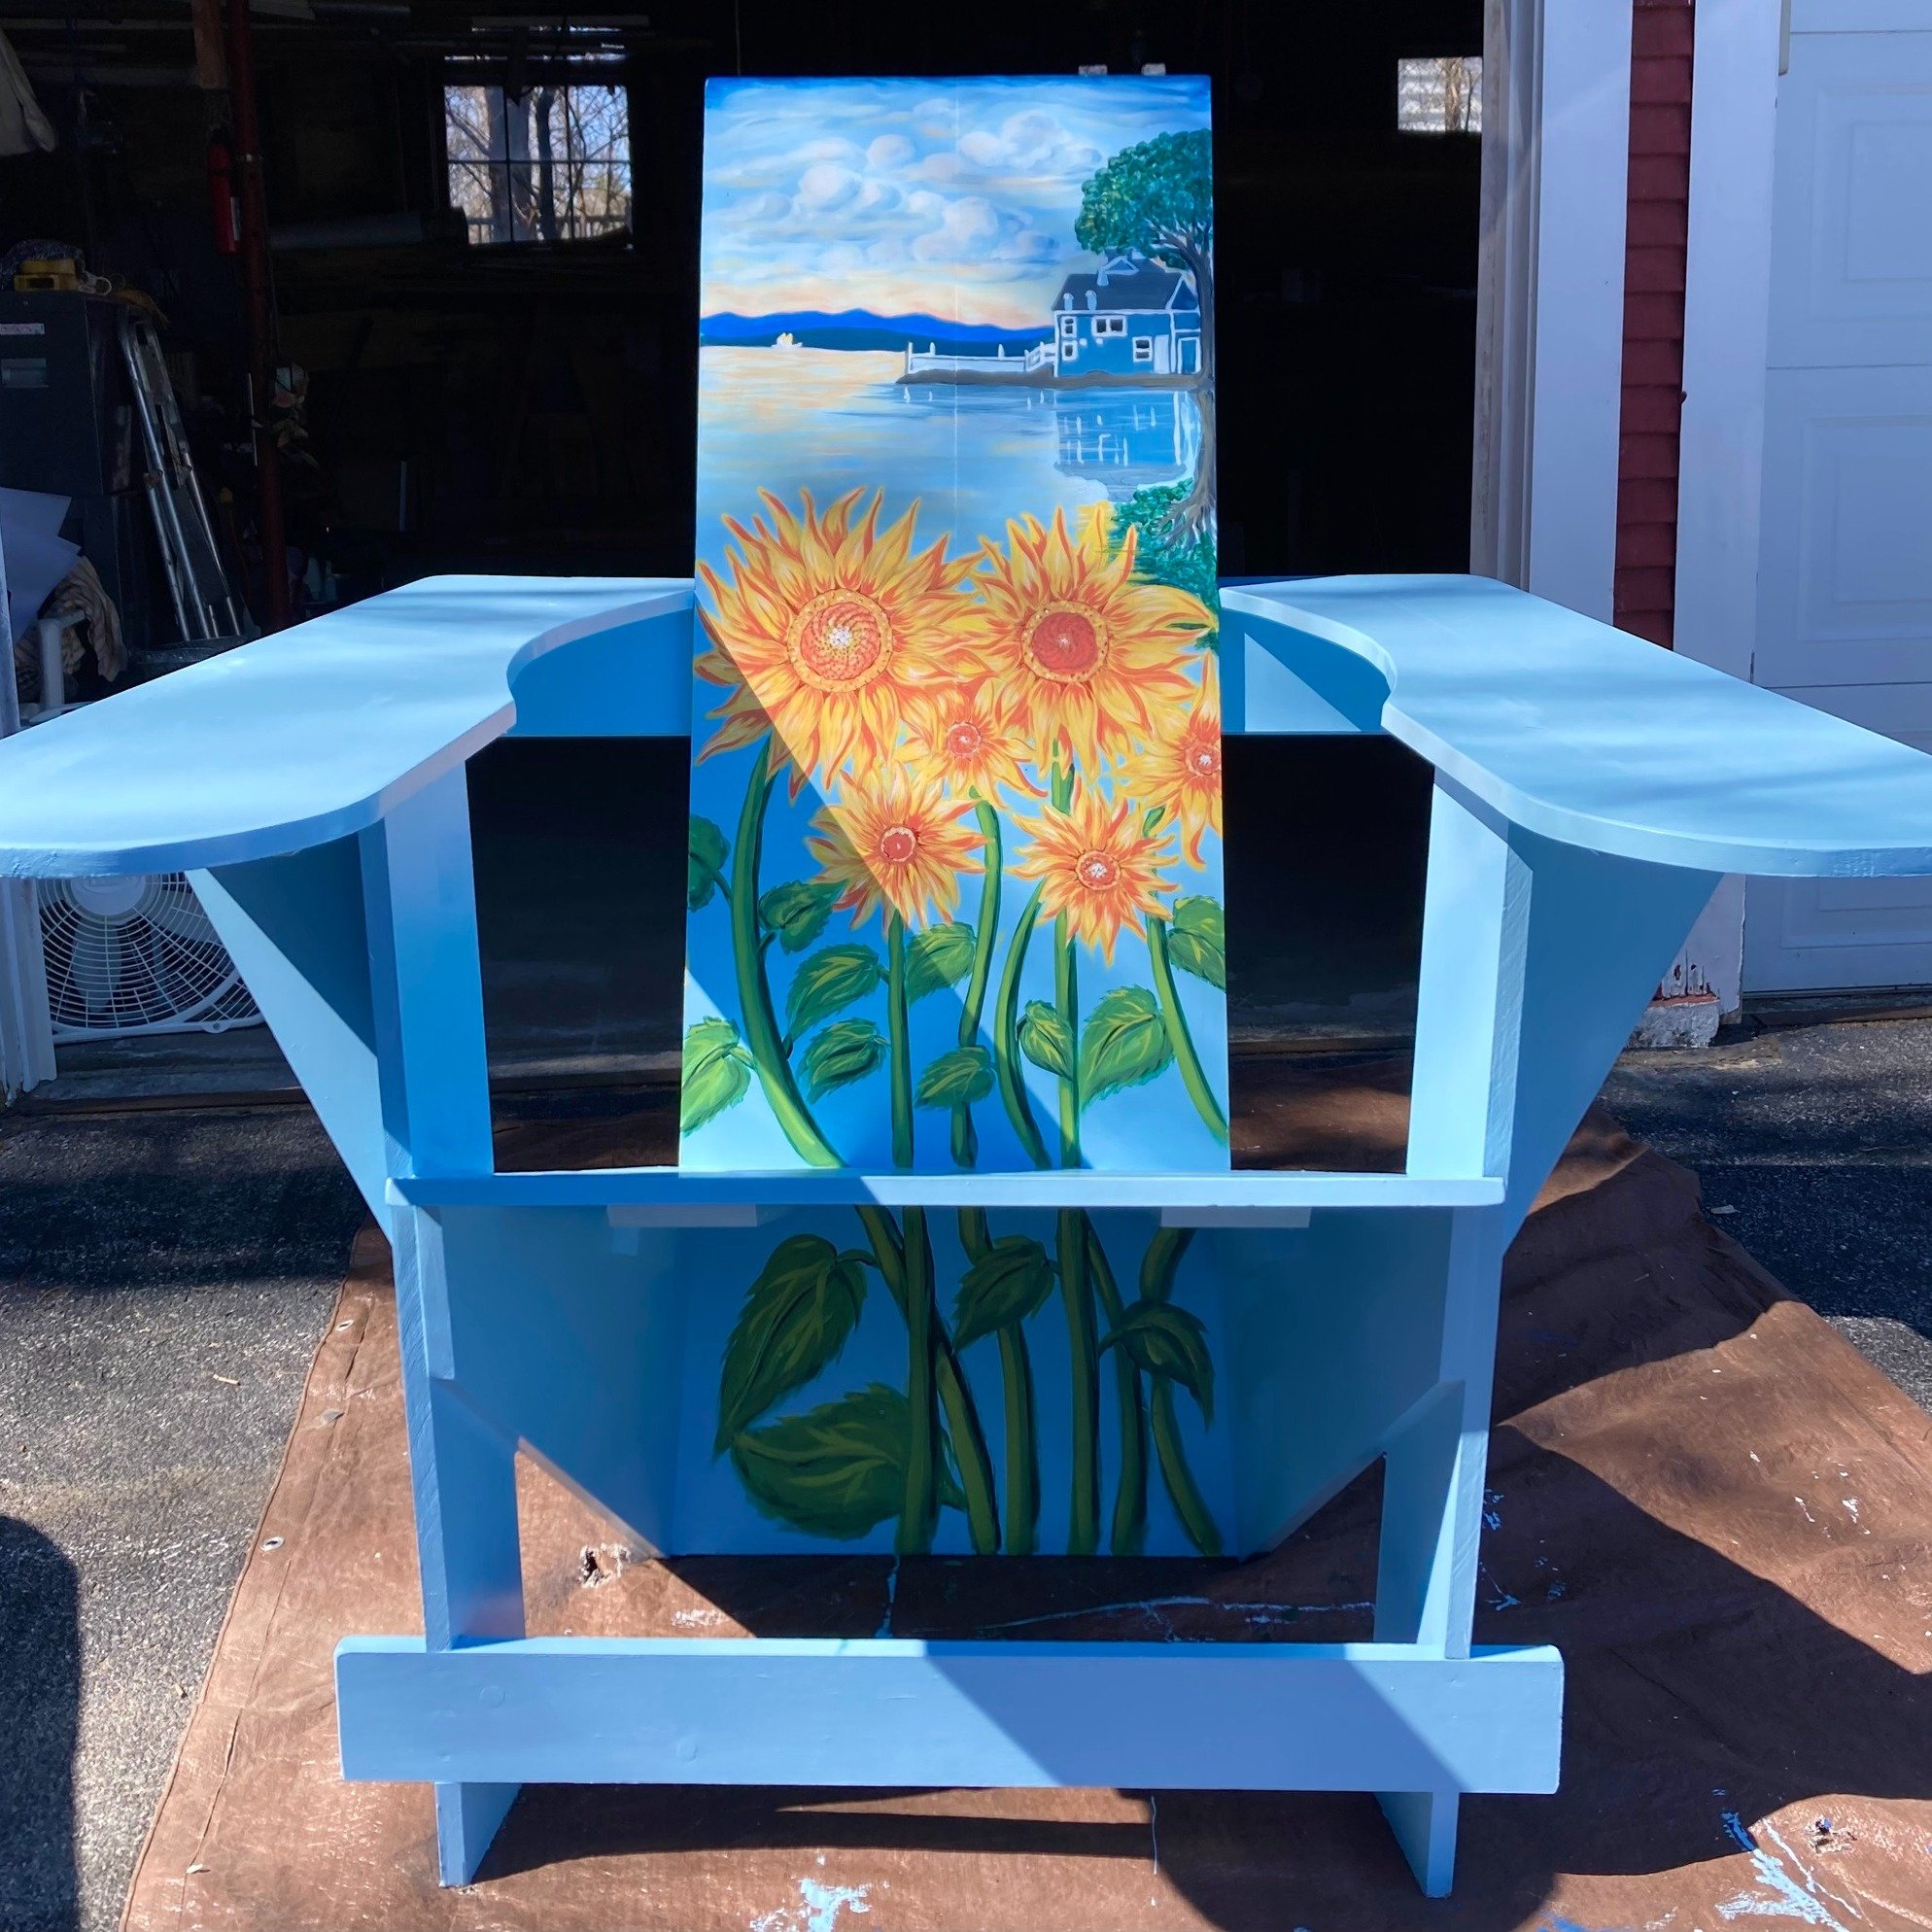 Mischief Managed! Giant Westport Chair done and almost ready to take its place at Hamilton Hall in Westport. Come have your photo taken while slowing down in town! check out the full project of the Safe Roads Committee on our website:https://www.gowe